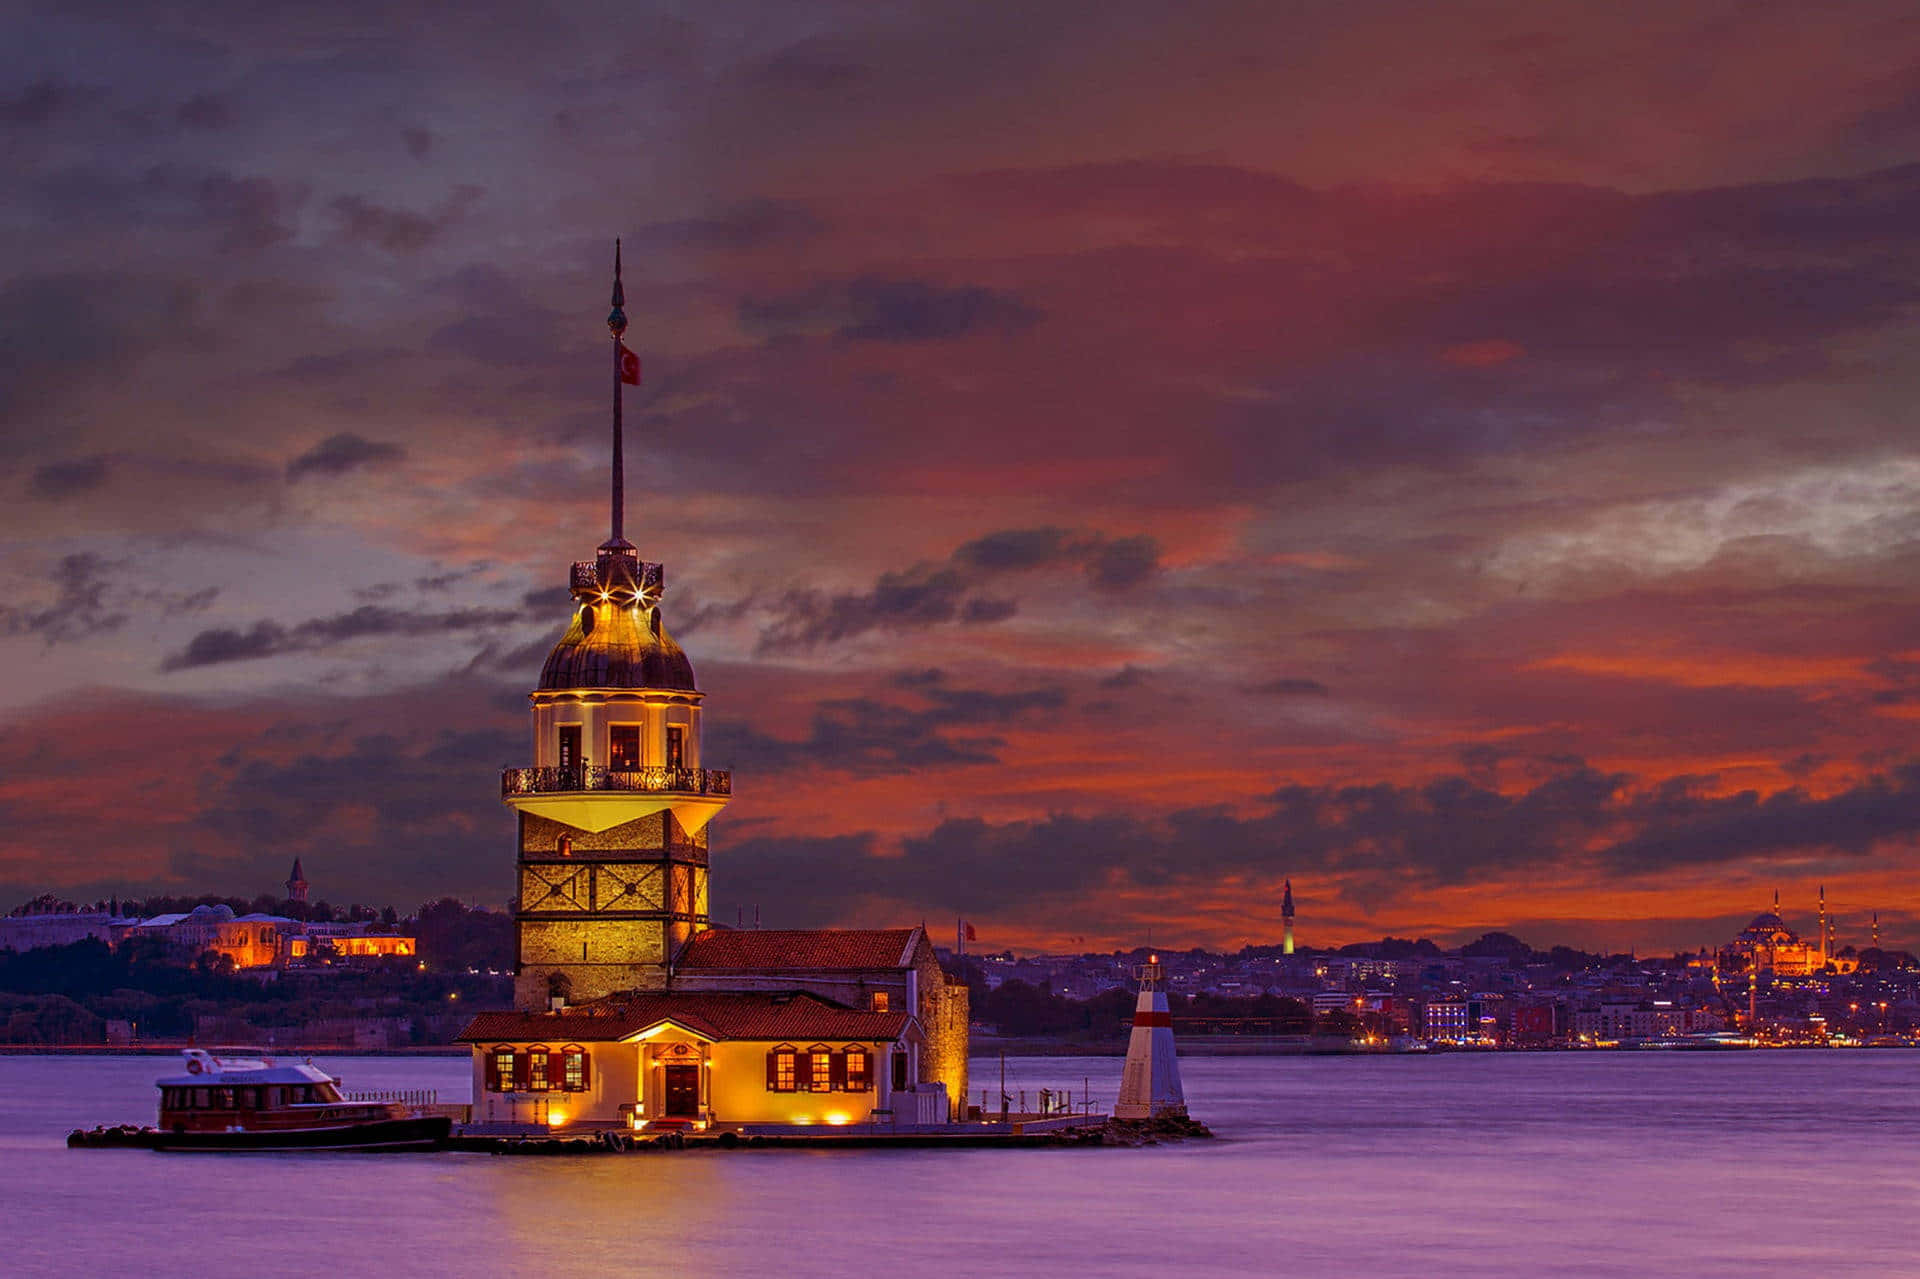 Caption: Majestic Maiden Tower At Sunset Wallpaper